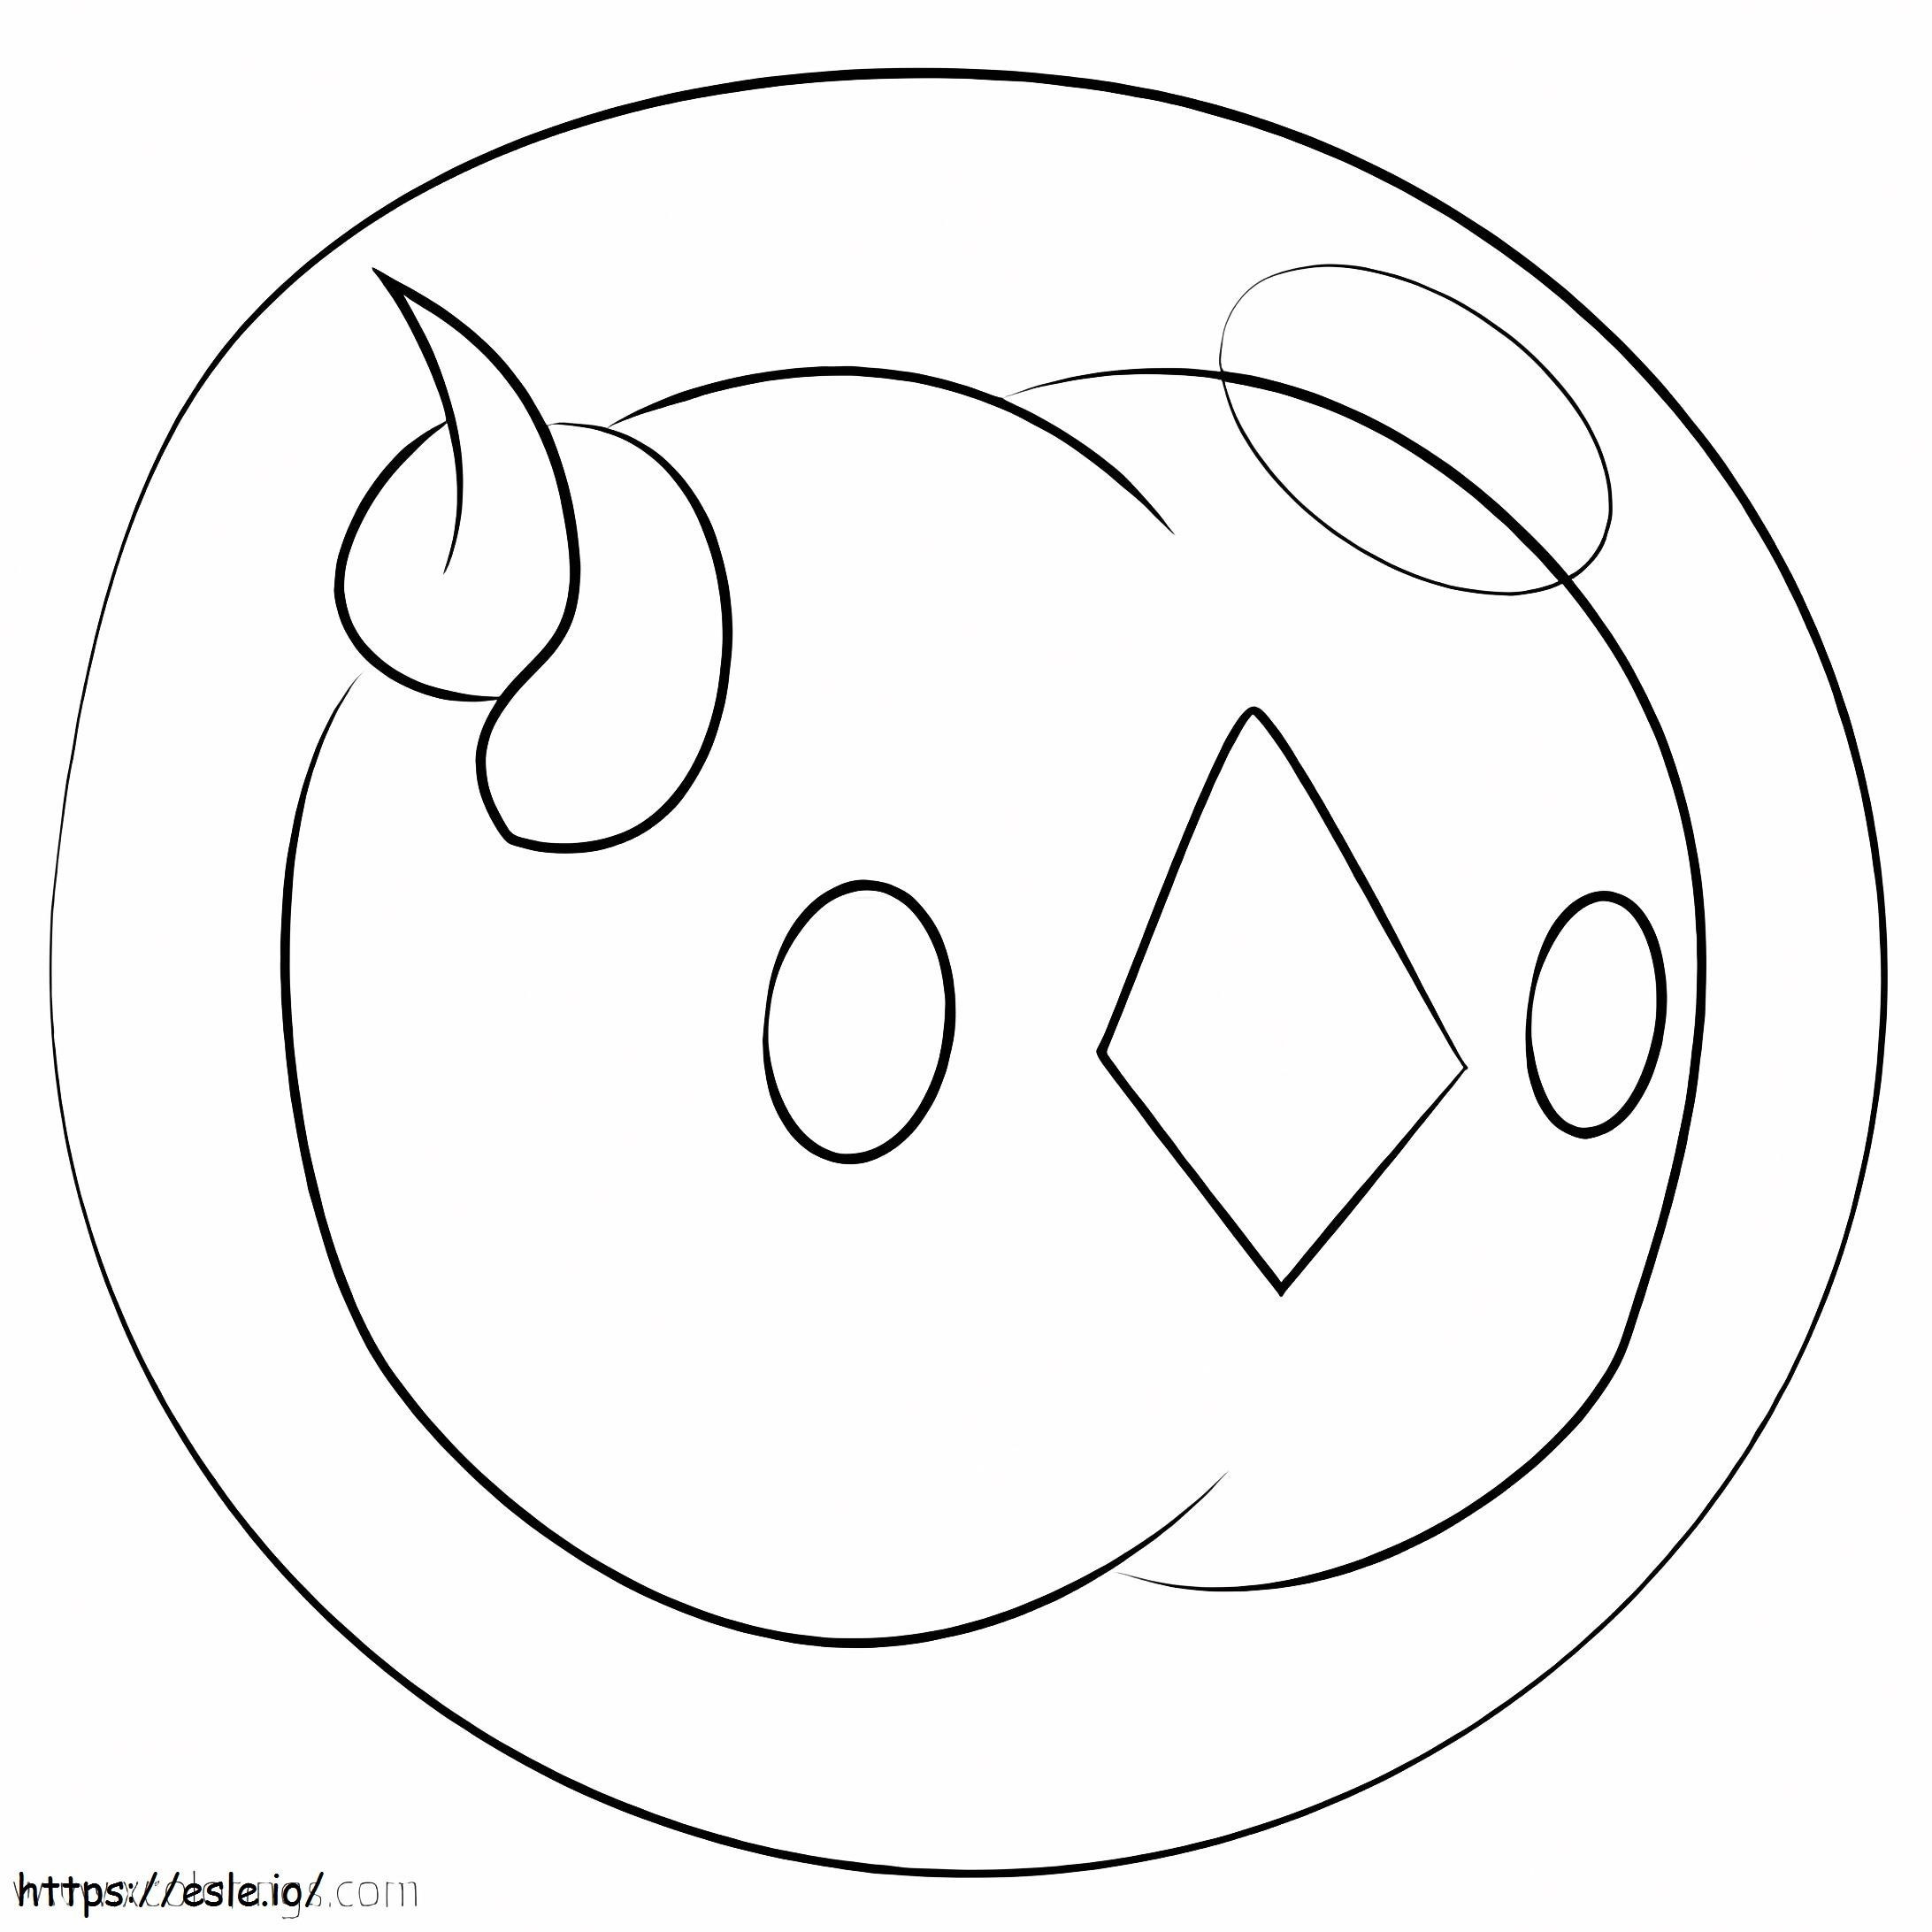 Solosis Pokemon 2 coloring page